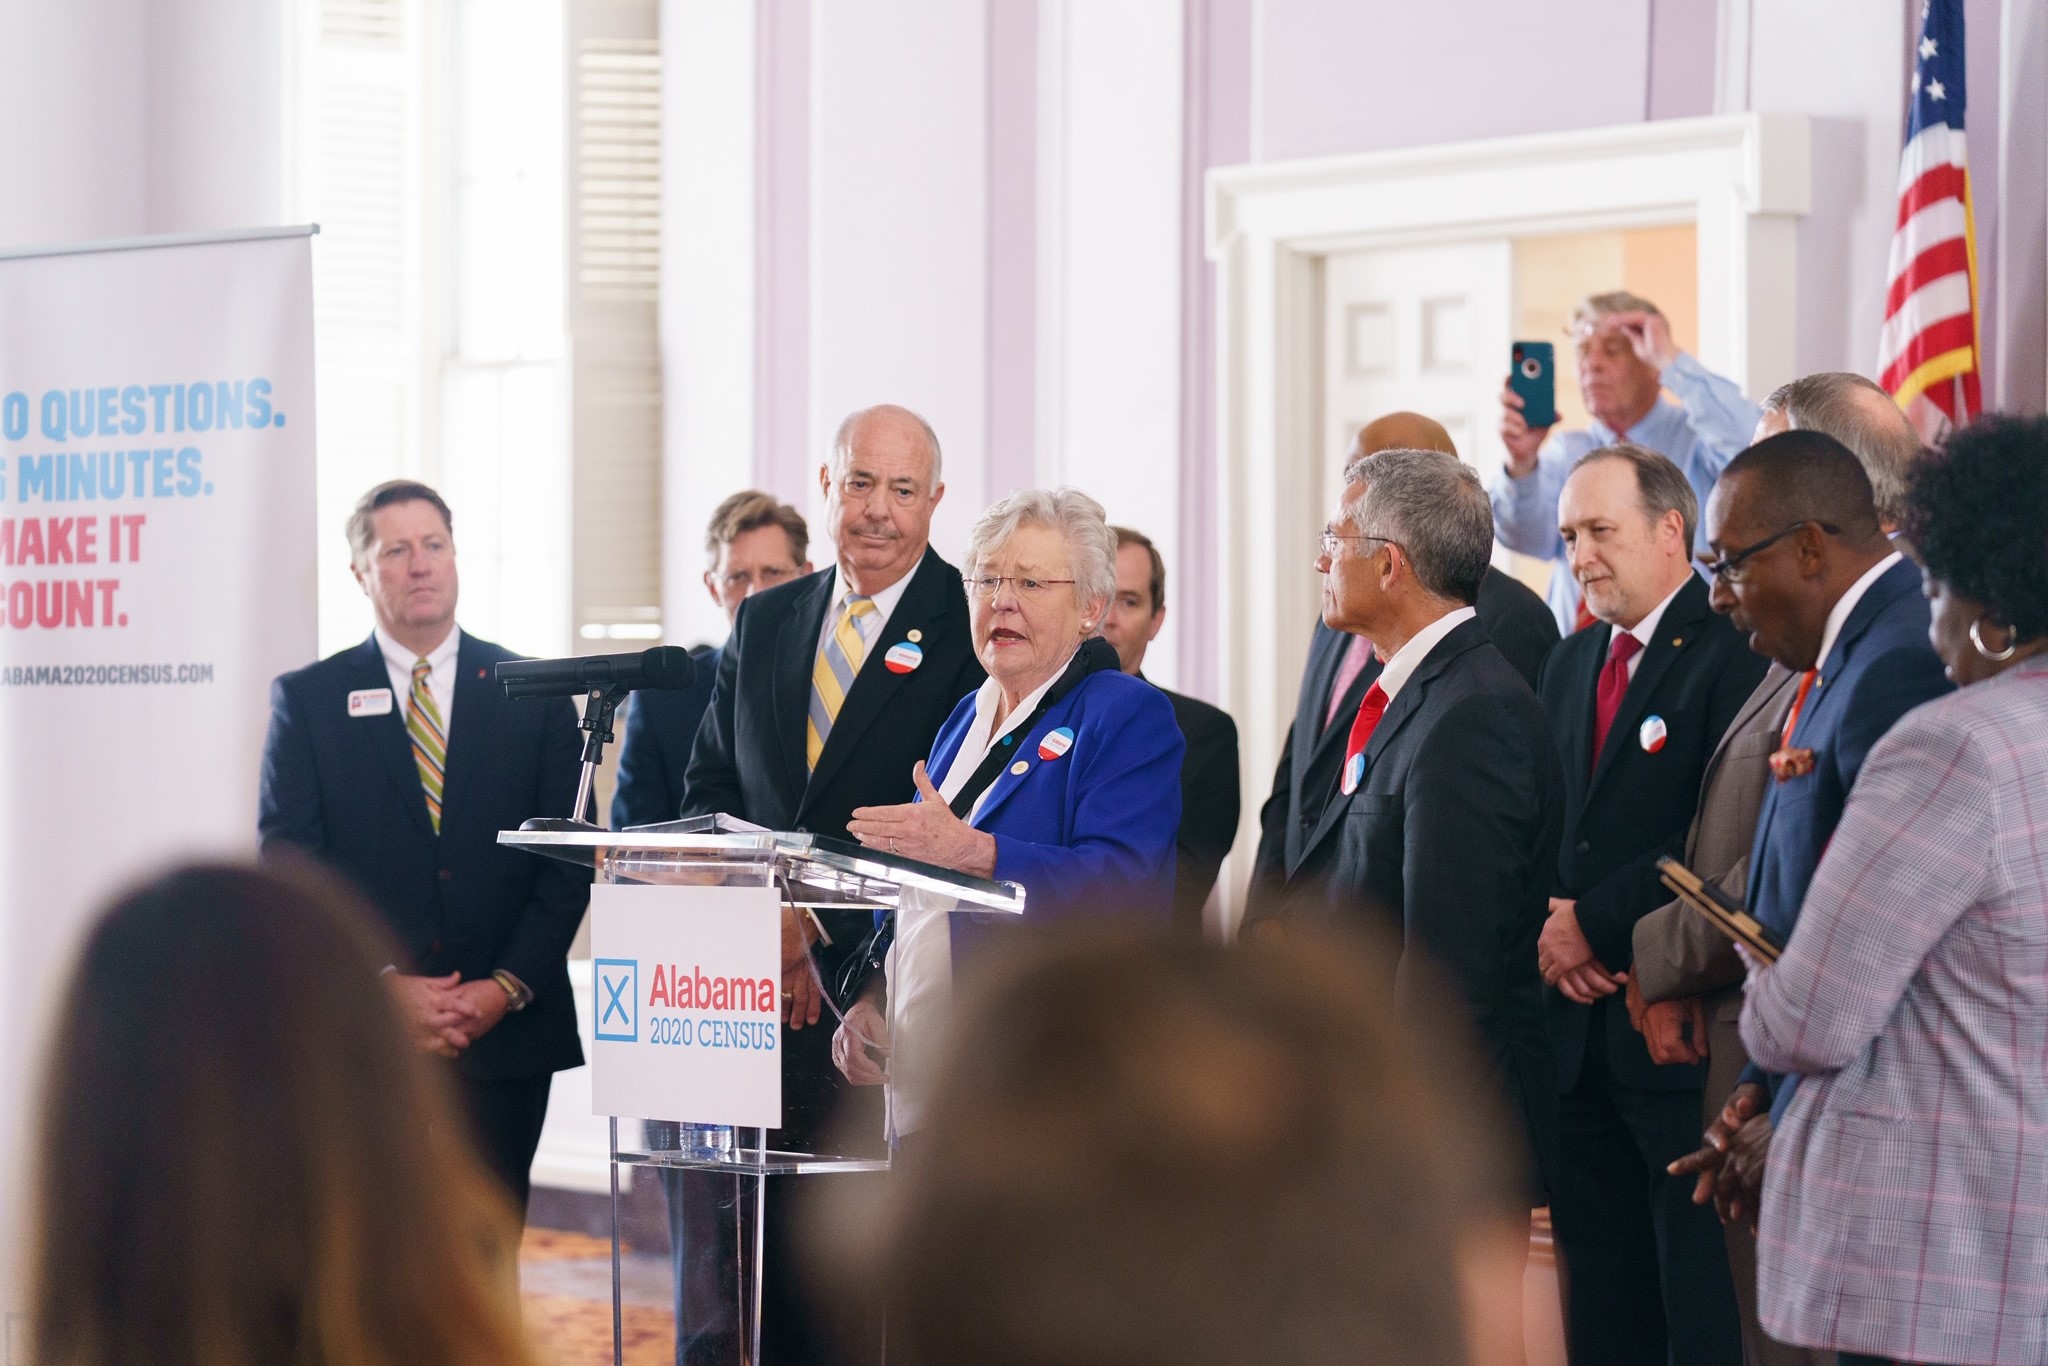 Gov. Kay Ivey Formally Launches Census 2020 in Alabama